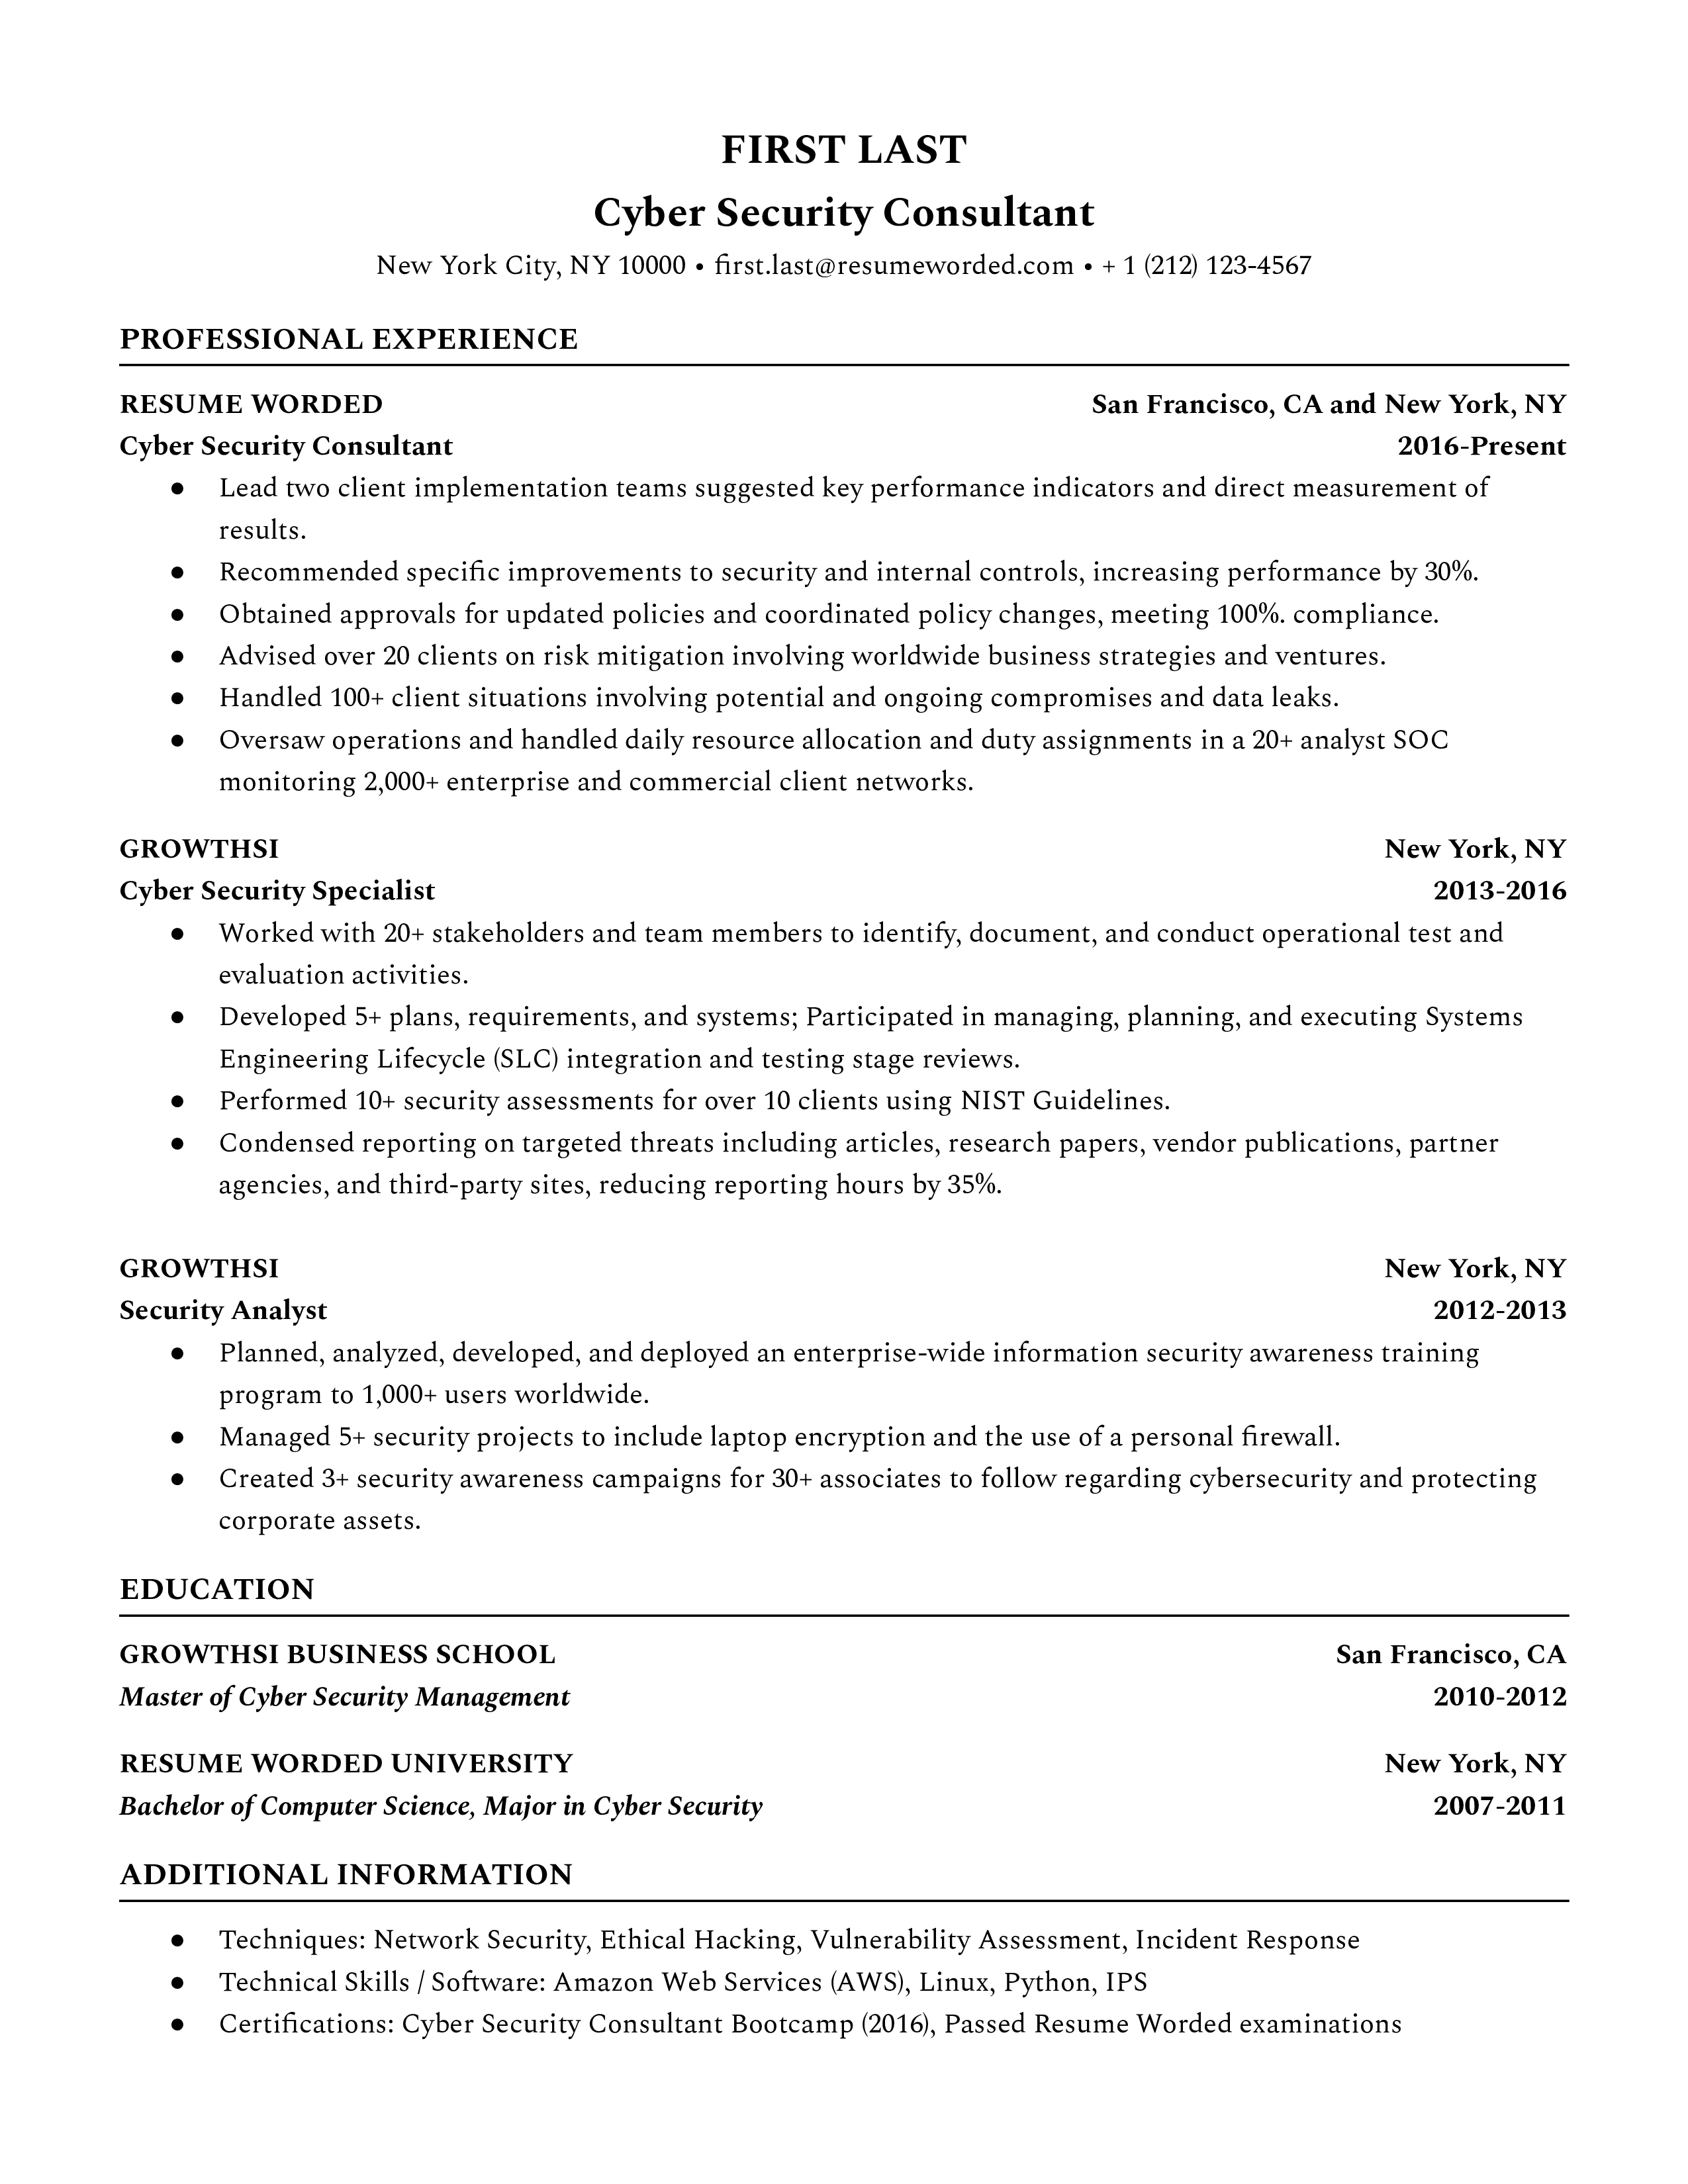 Cyber Security Consultant Resume Template + Example